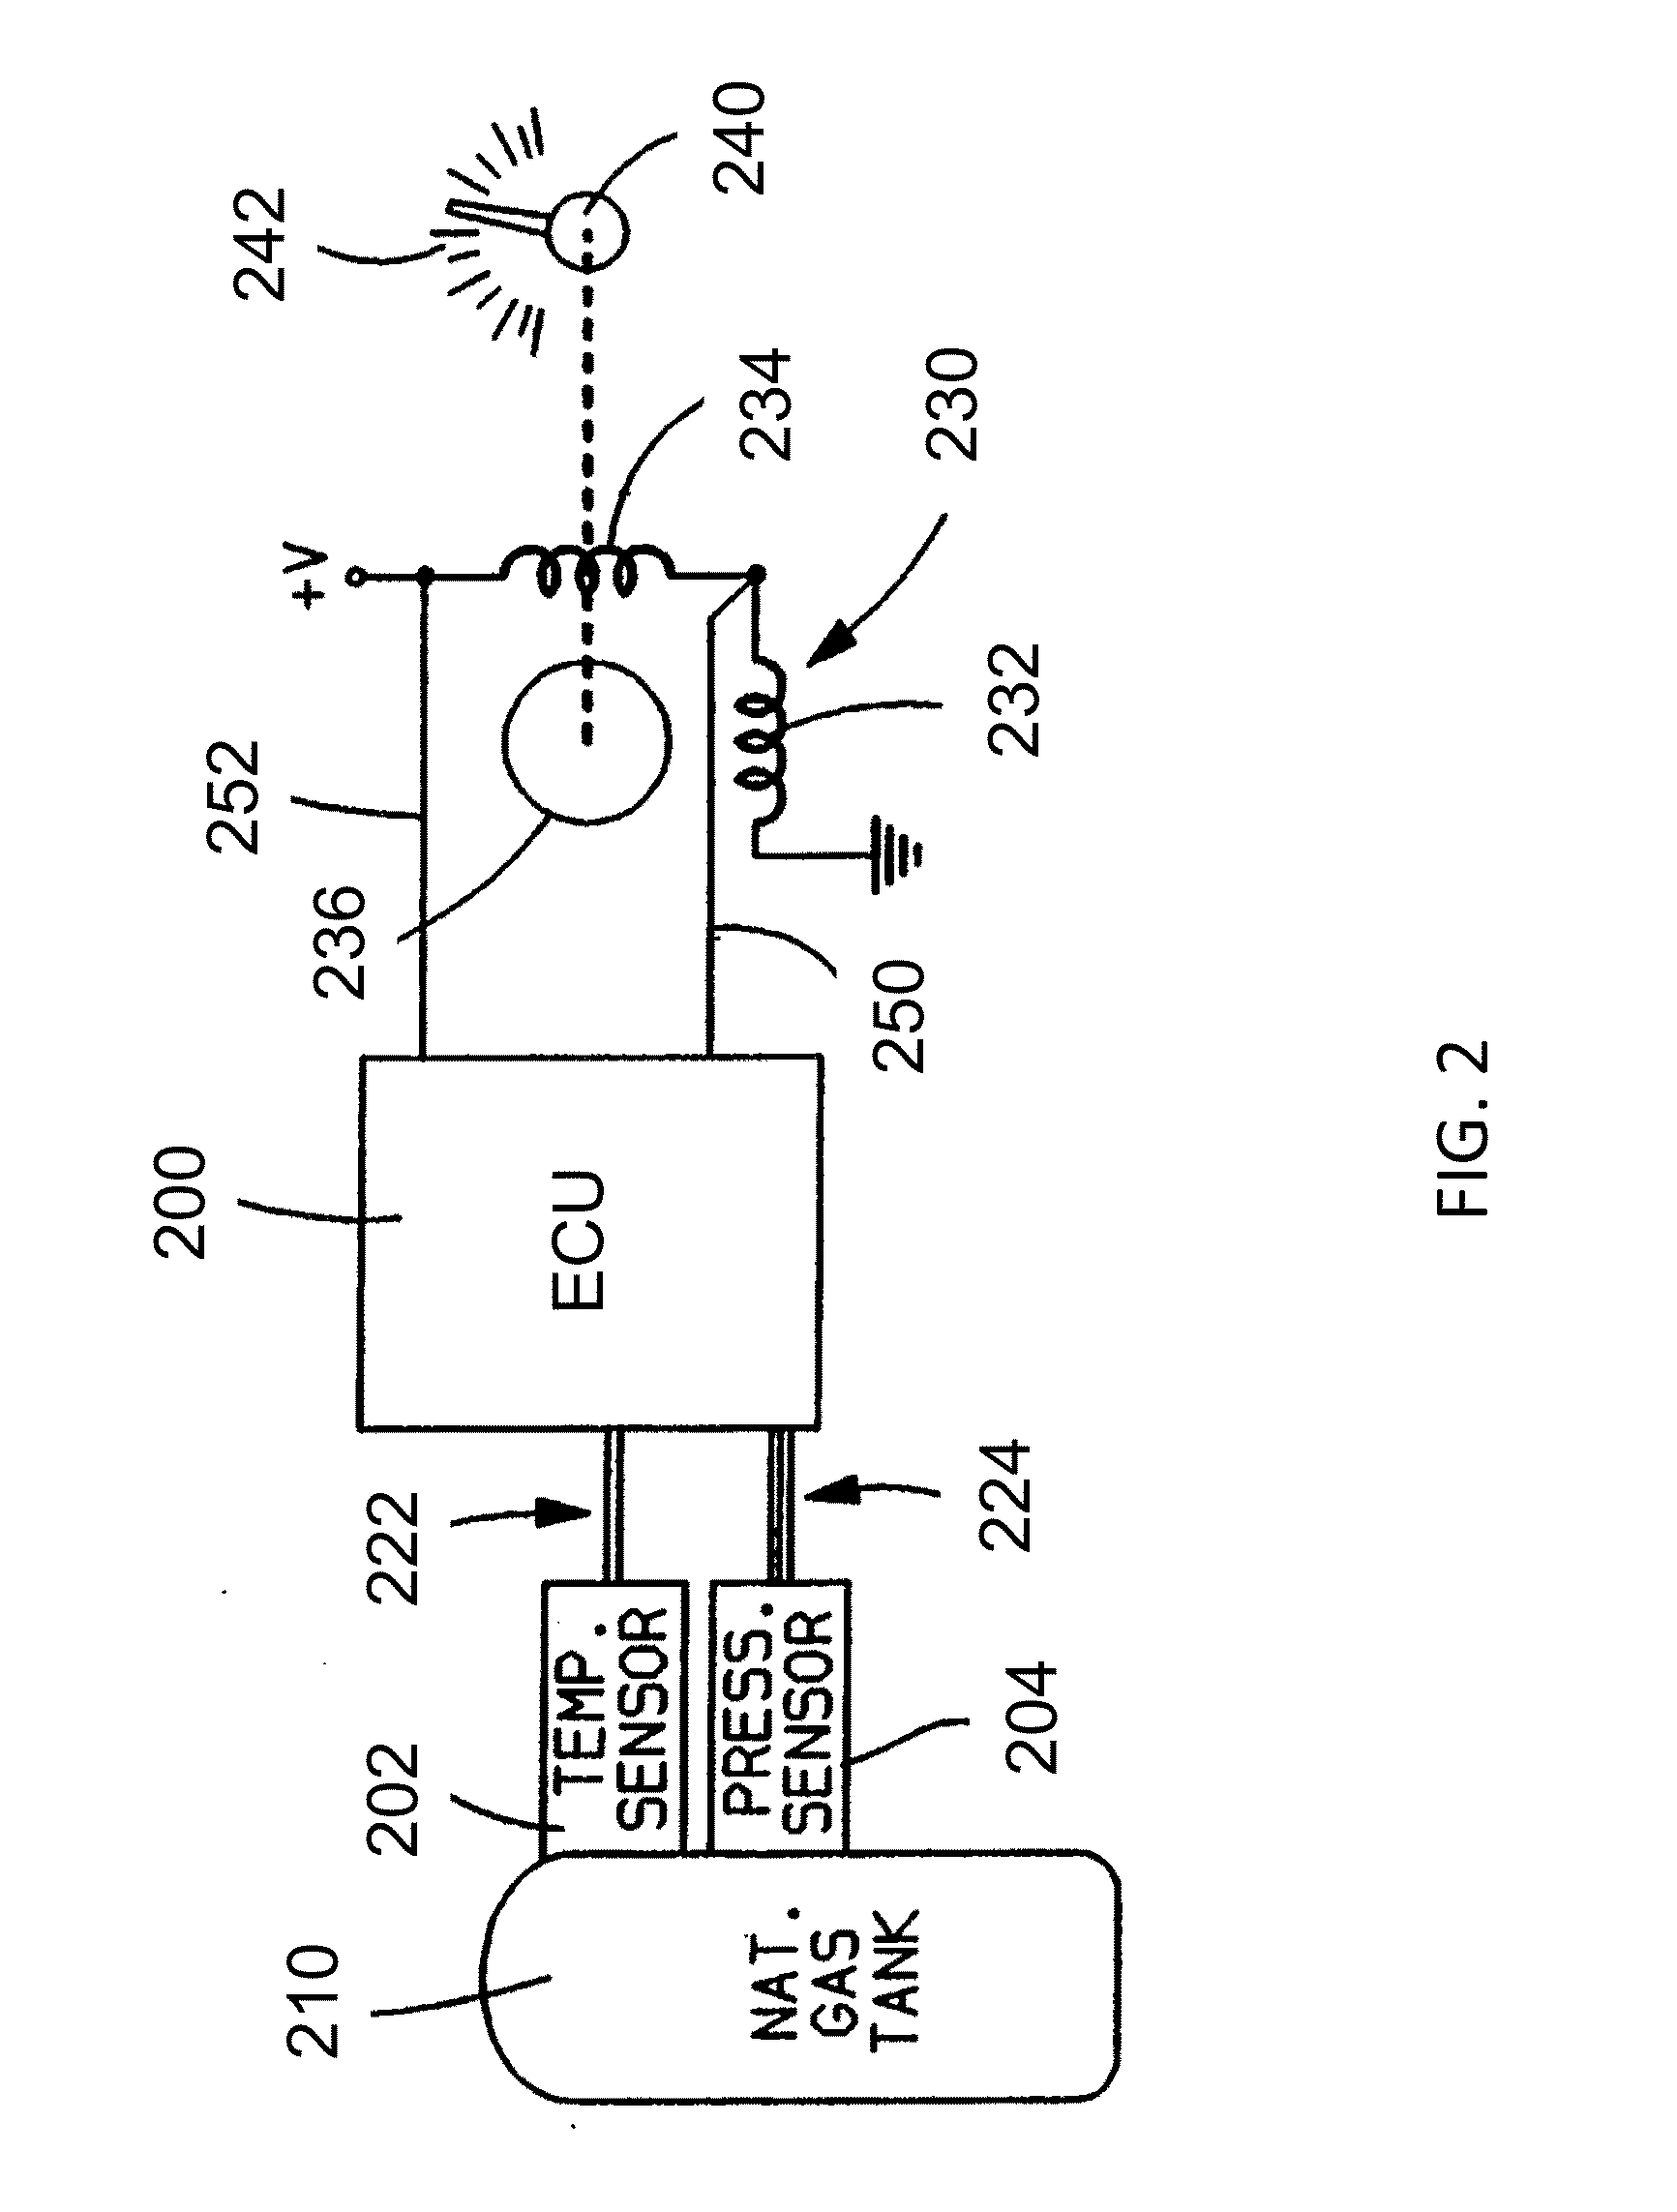 Systems and methods for monitoring and controlling fuel systems